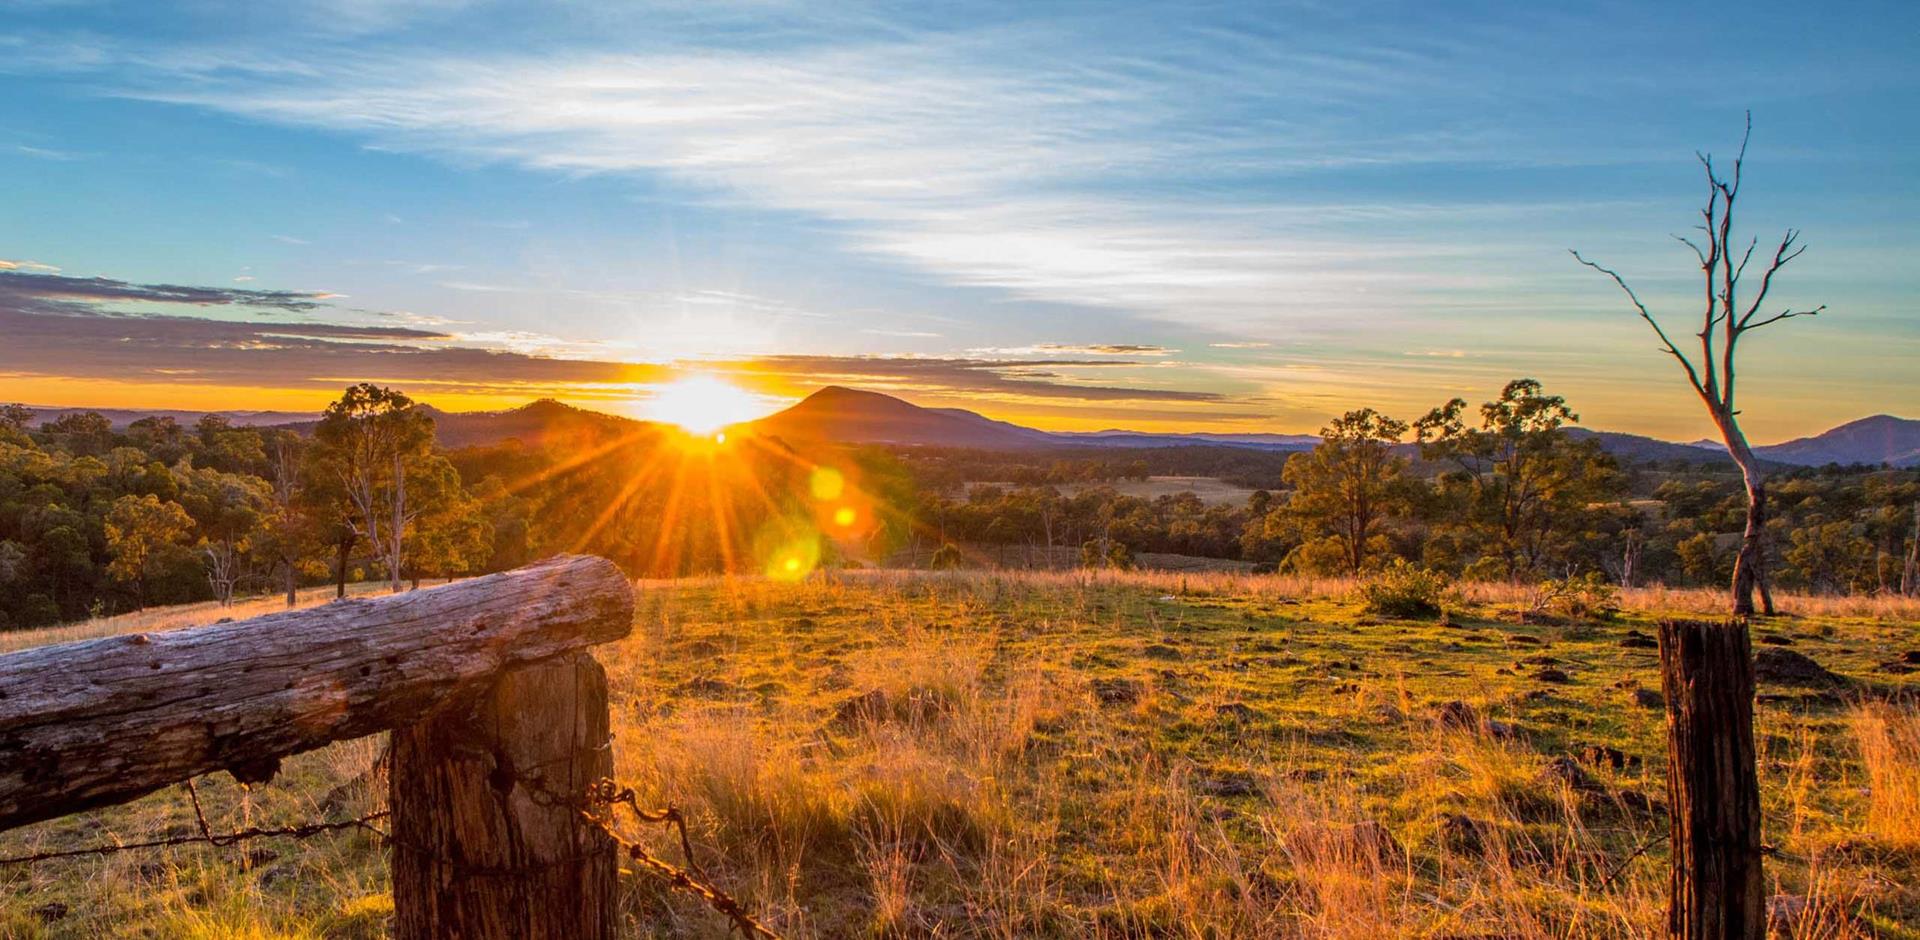 Visit the natural wonders of Scenic Rim, Australia with A&K